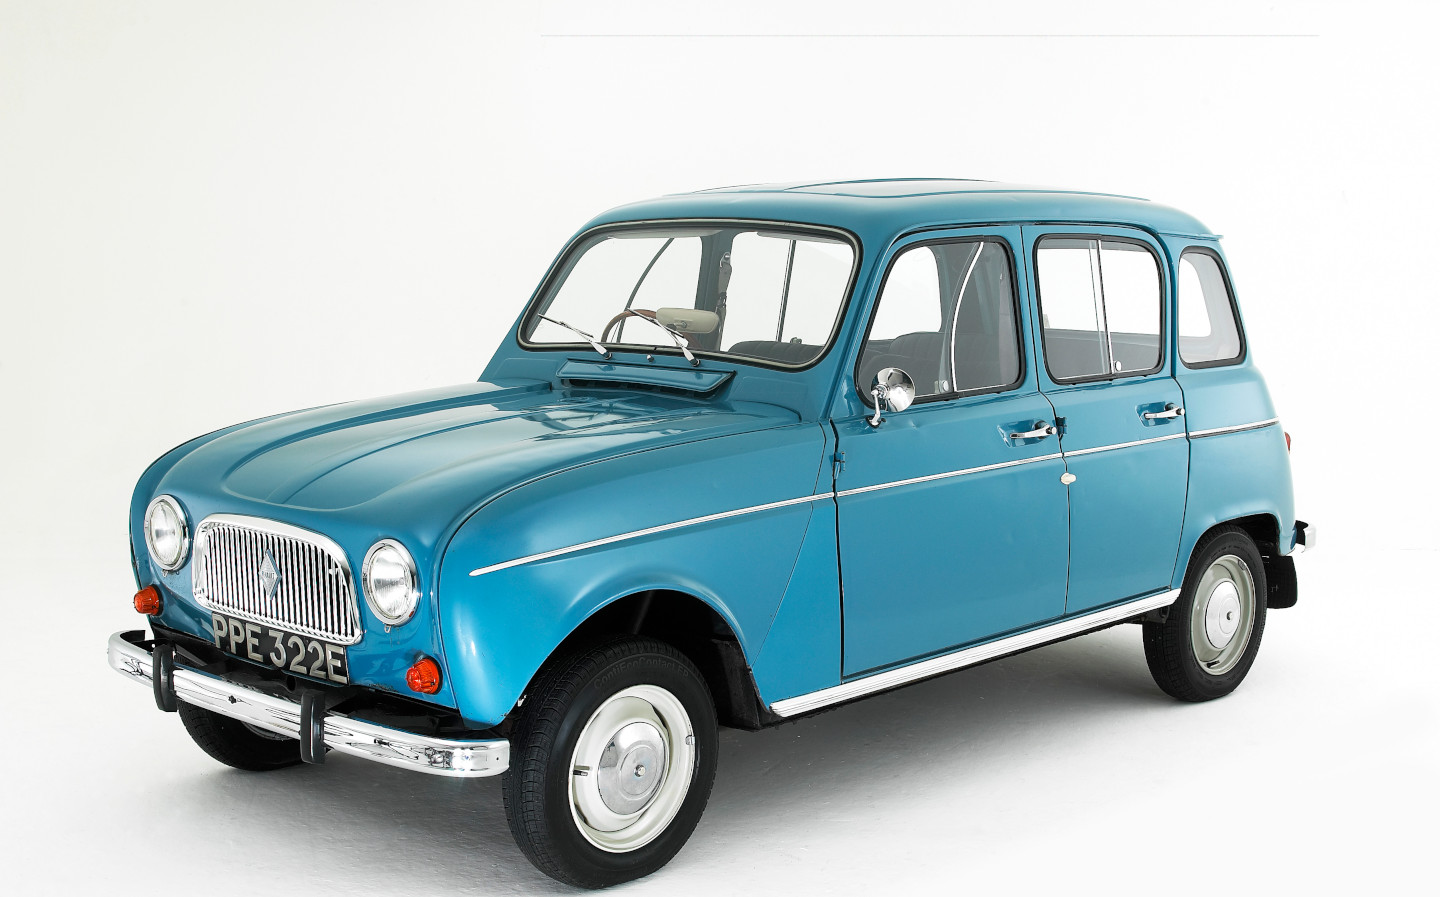 Renault 4 to be reborn as electric city car